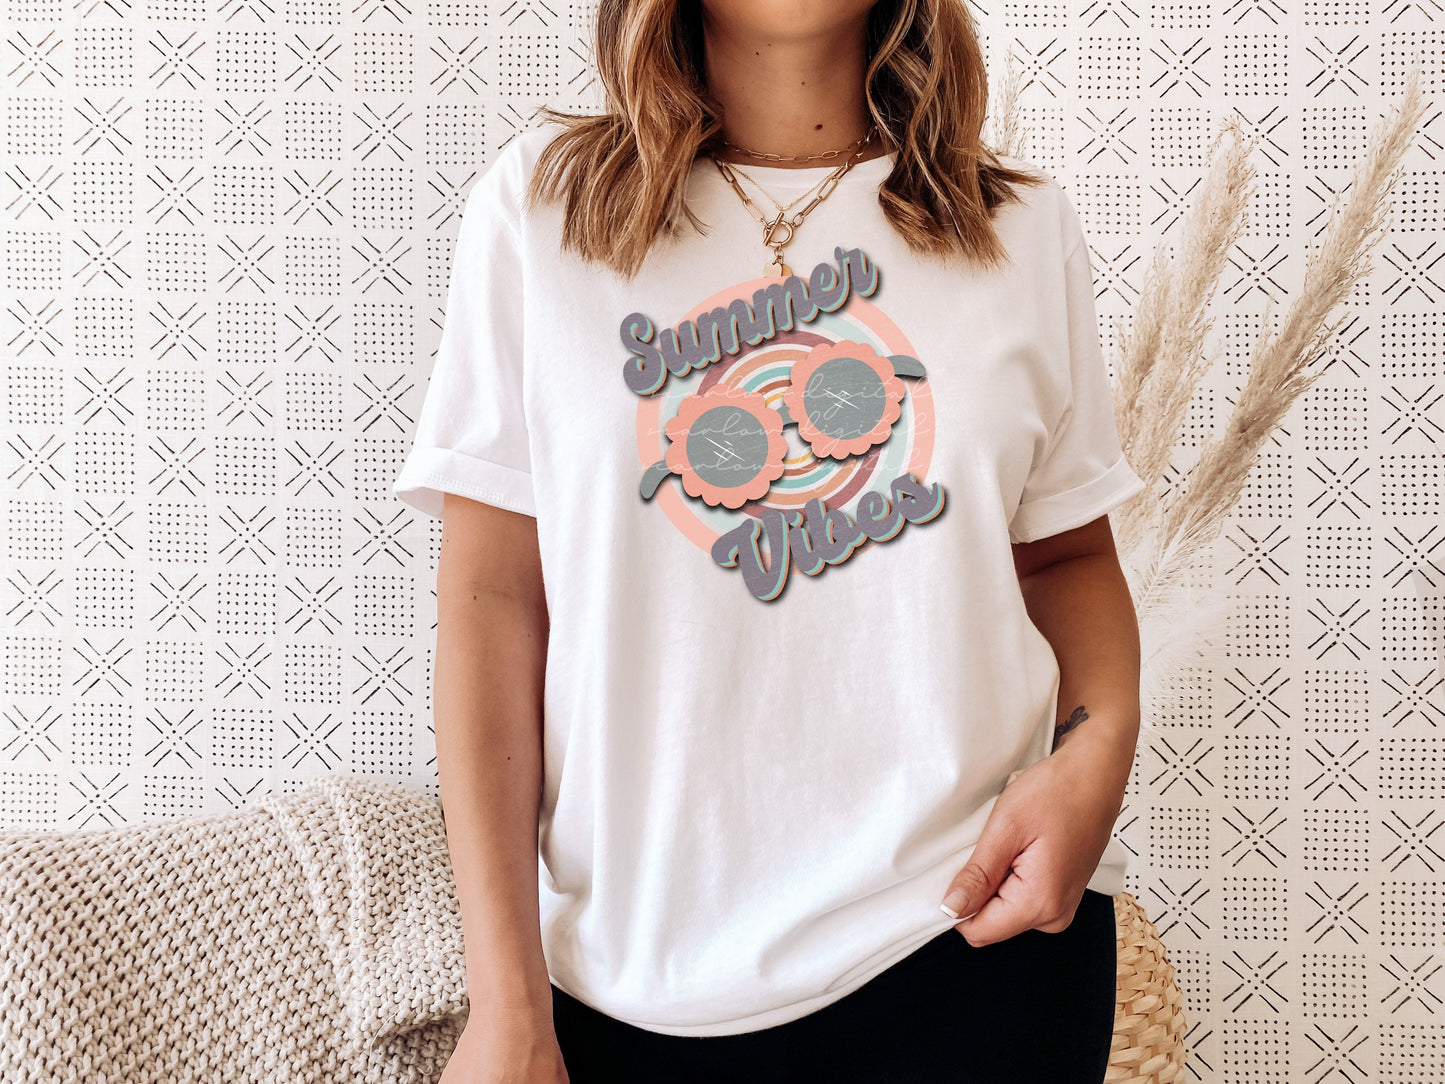 Summer Vibes PNG, Retro Vintage Summer Vibes PNG, Retro Vintage PNG, Summer Sublimation Design, Summer Tshirt png, png for summertime